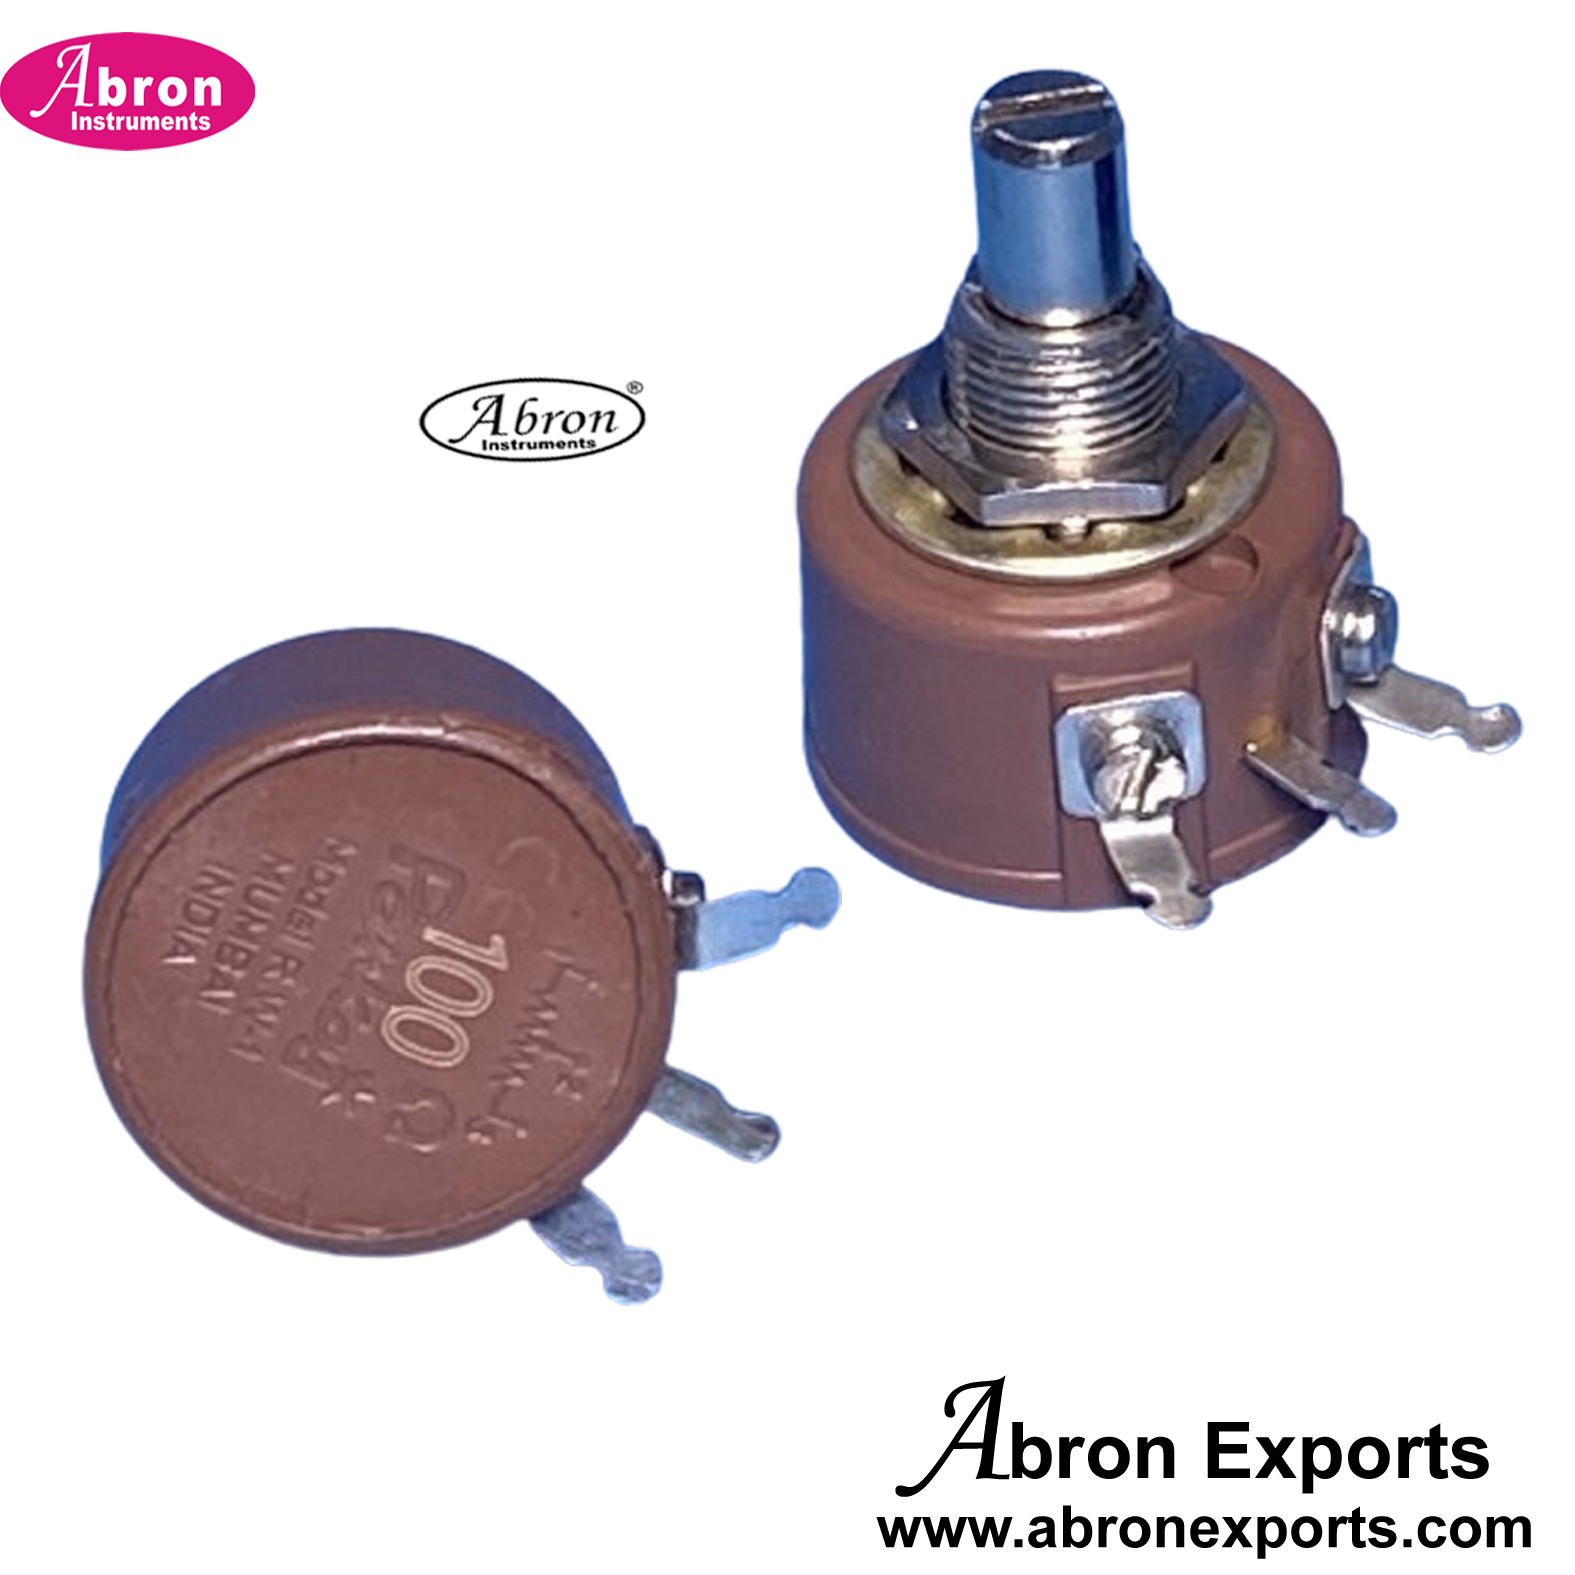 Electronic Component Spare Potentiometer knob 100 Ohms or other say 500 Ohms 100pc Abron AE-1224PT1H 